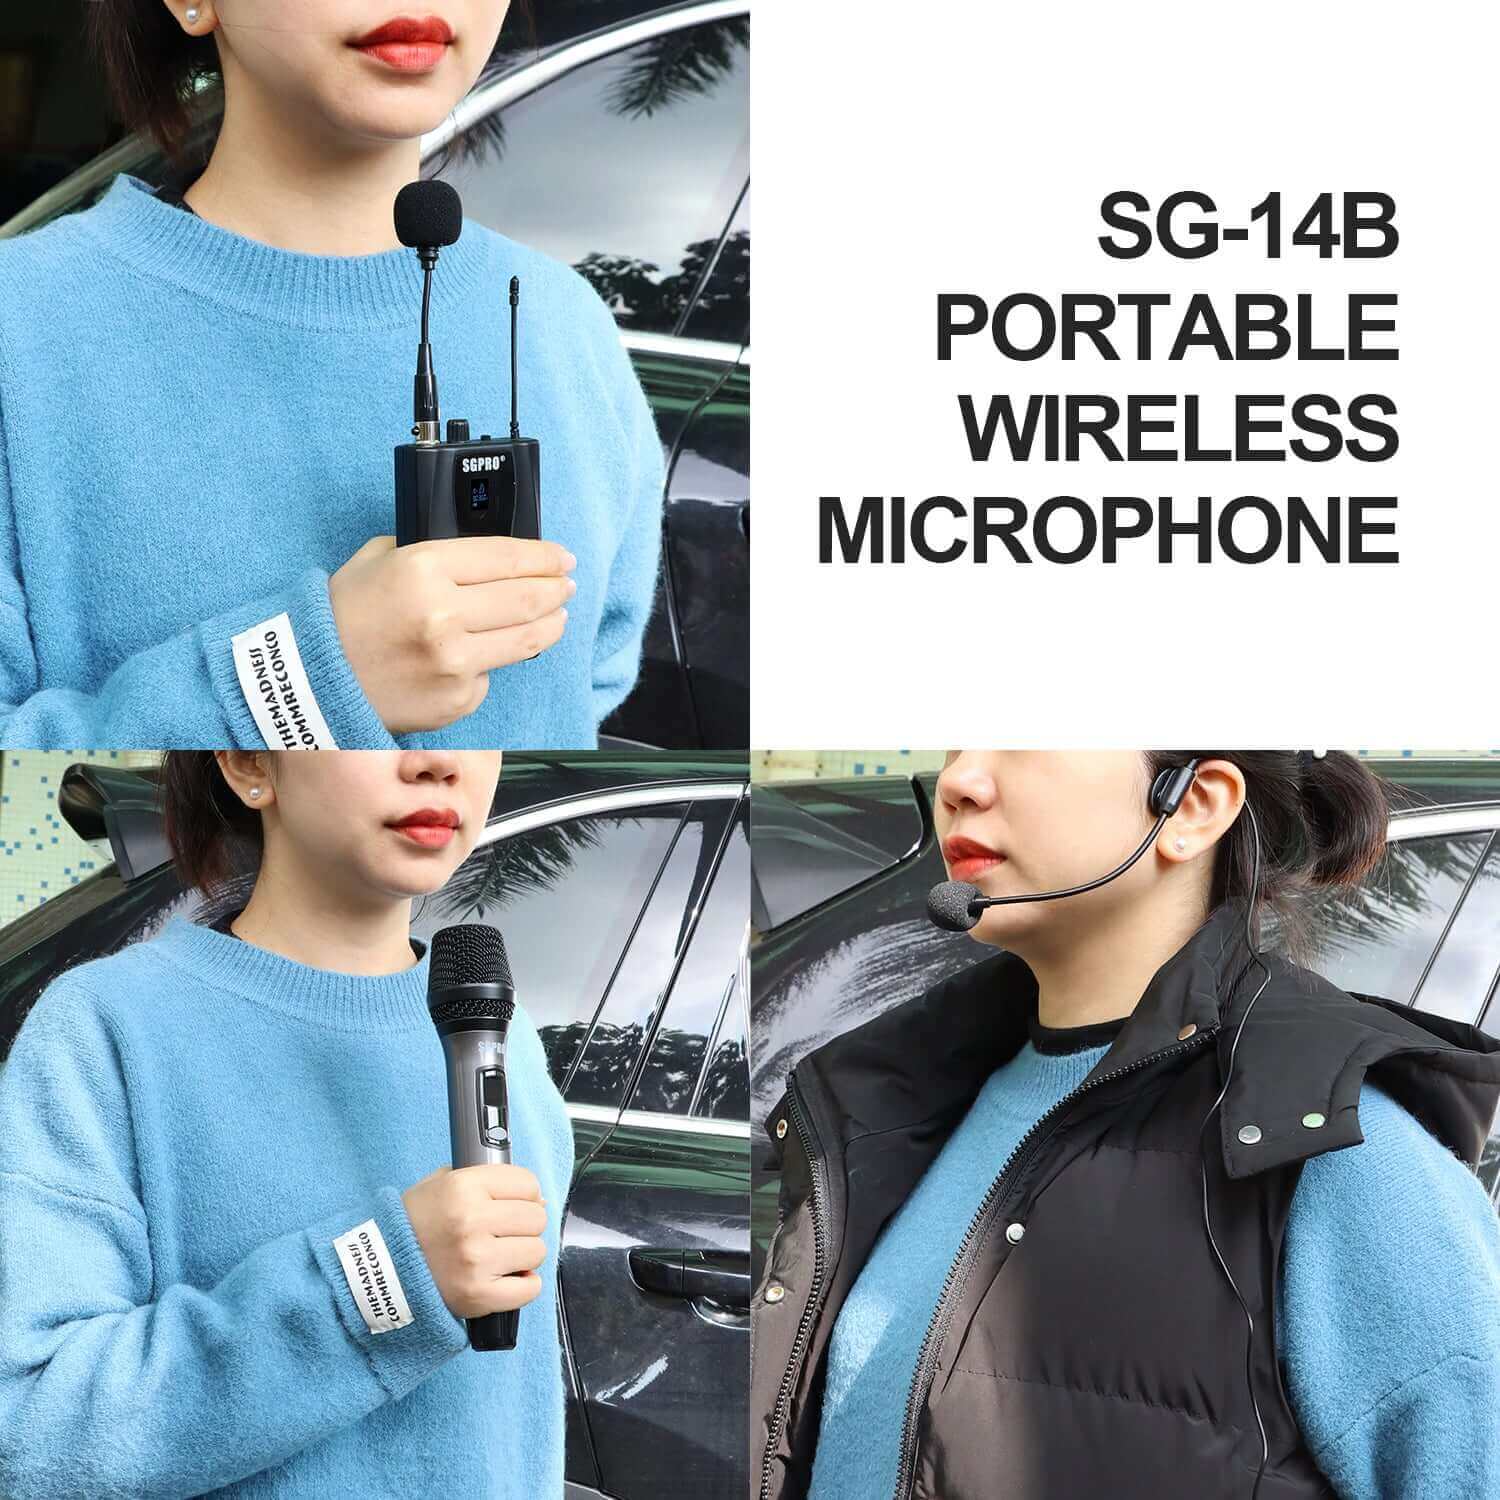 SGPRO Headworn and Handheld Wireless Microphone Compact Set, 32 Channels 262 Ft Transmission AA Batteries Powered, Mute and Volume Control